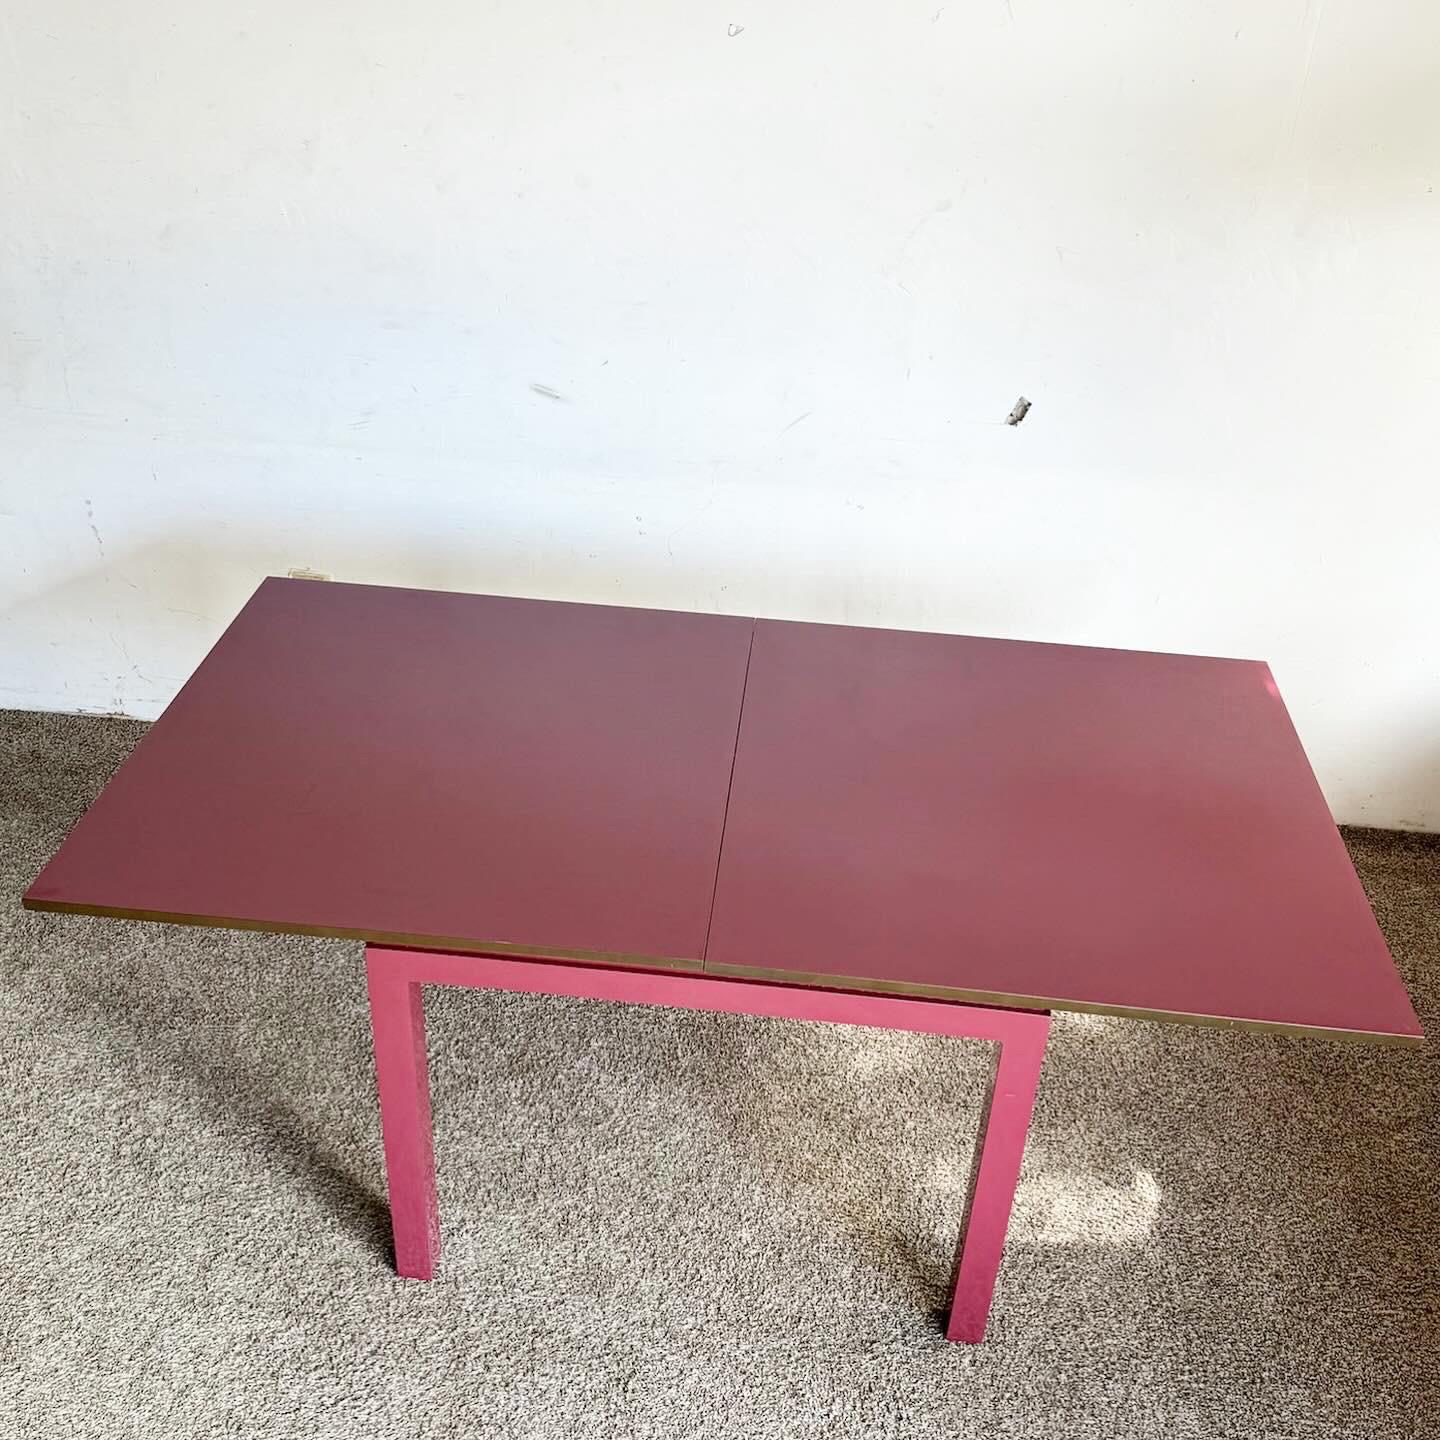 20th Century Postmodern Purple Lacquer Laminate Extendable Card/Dining Table With Storage For Sale